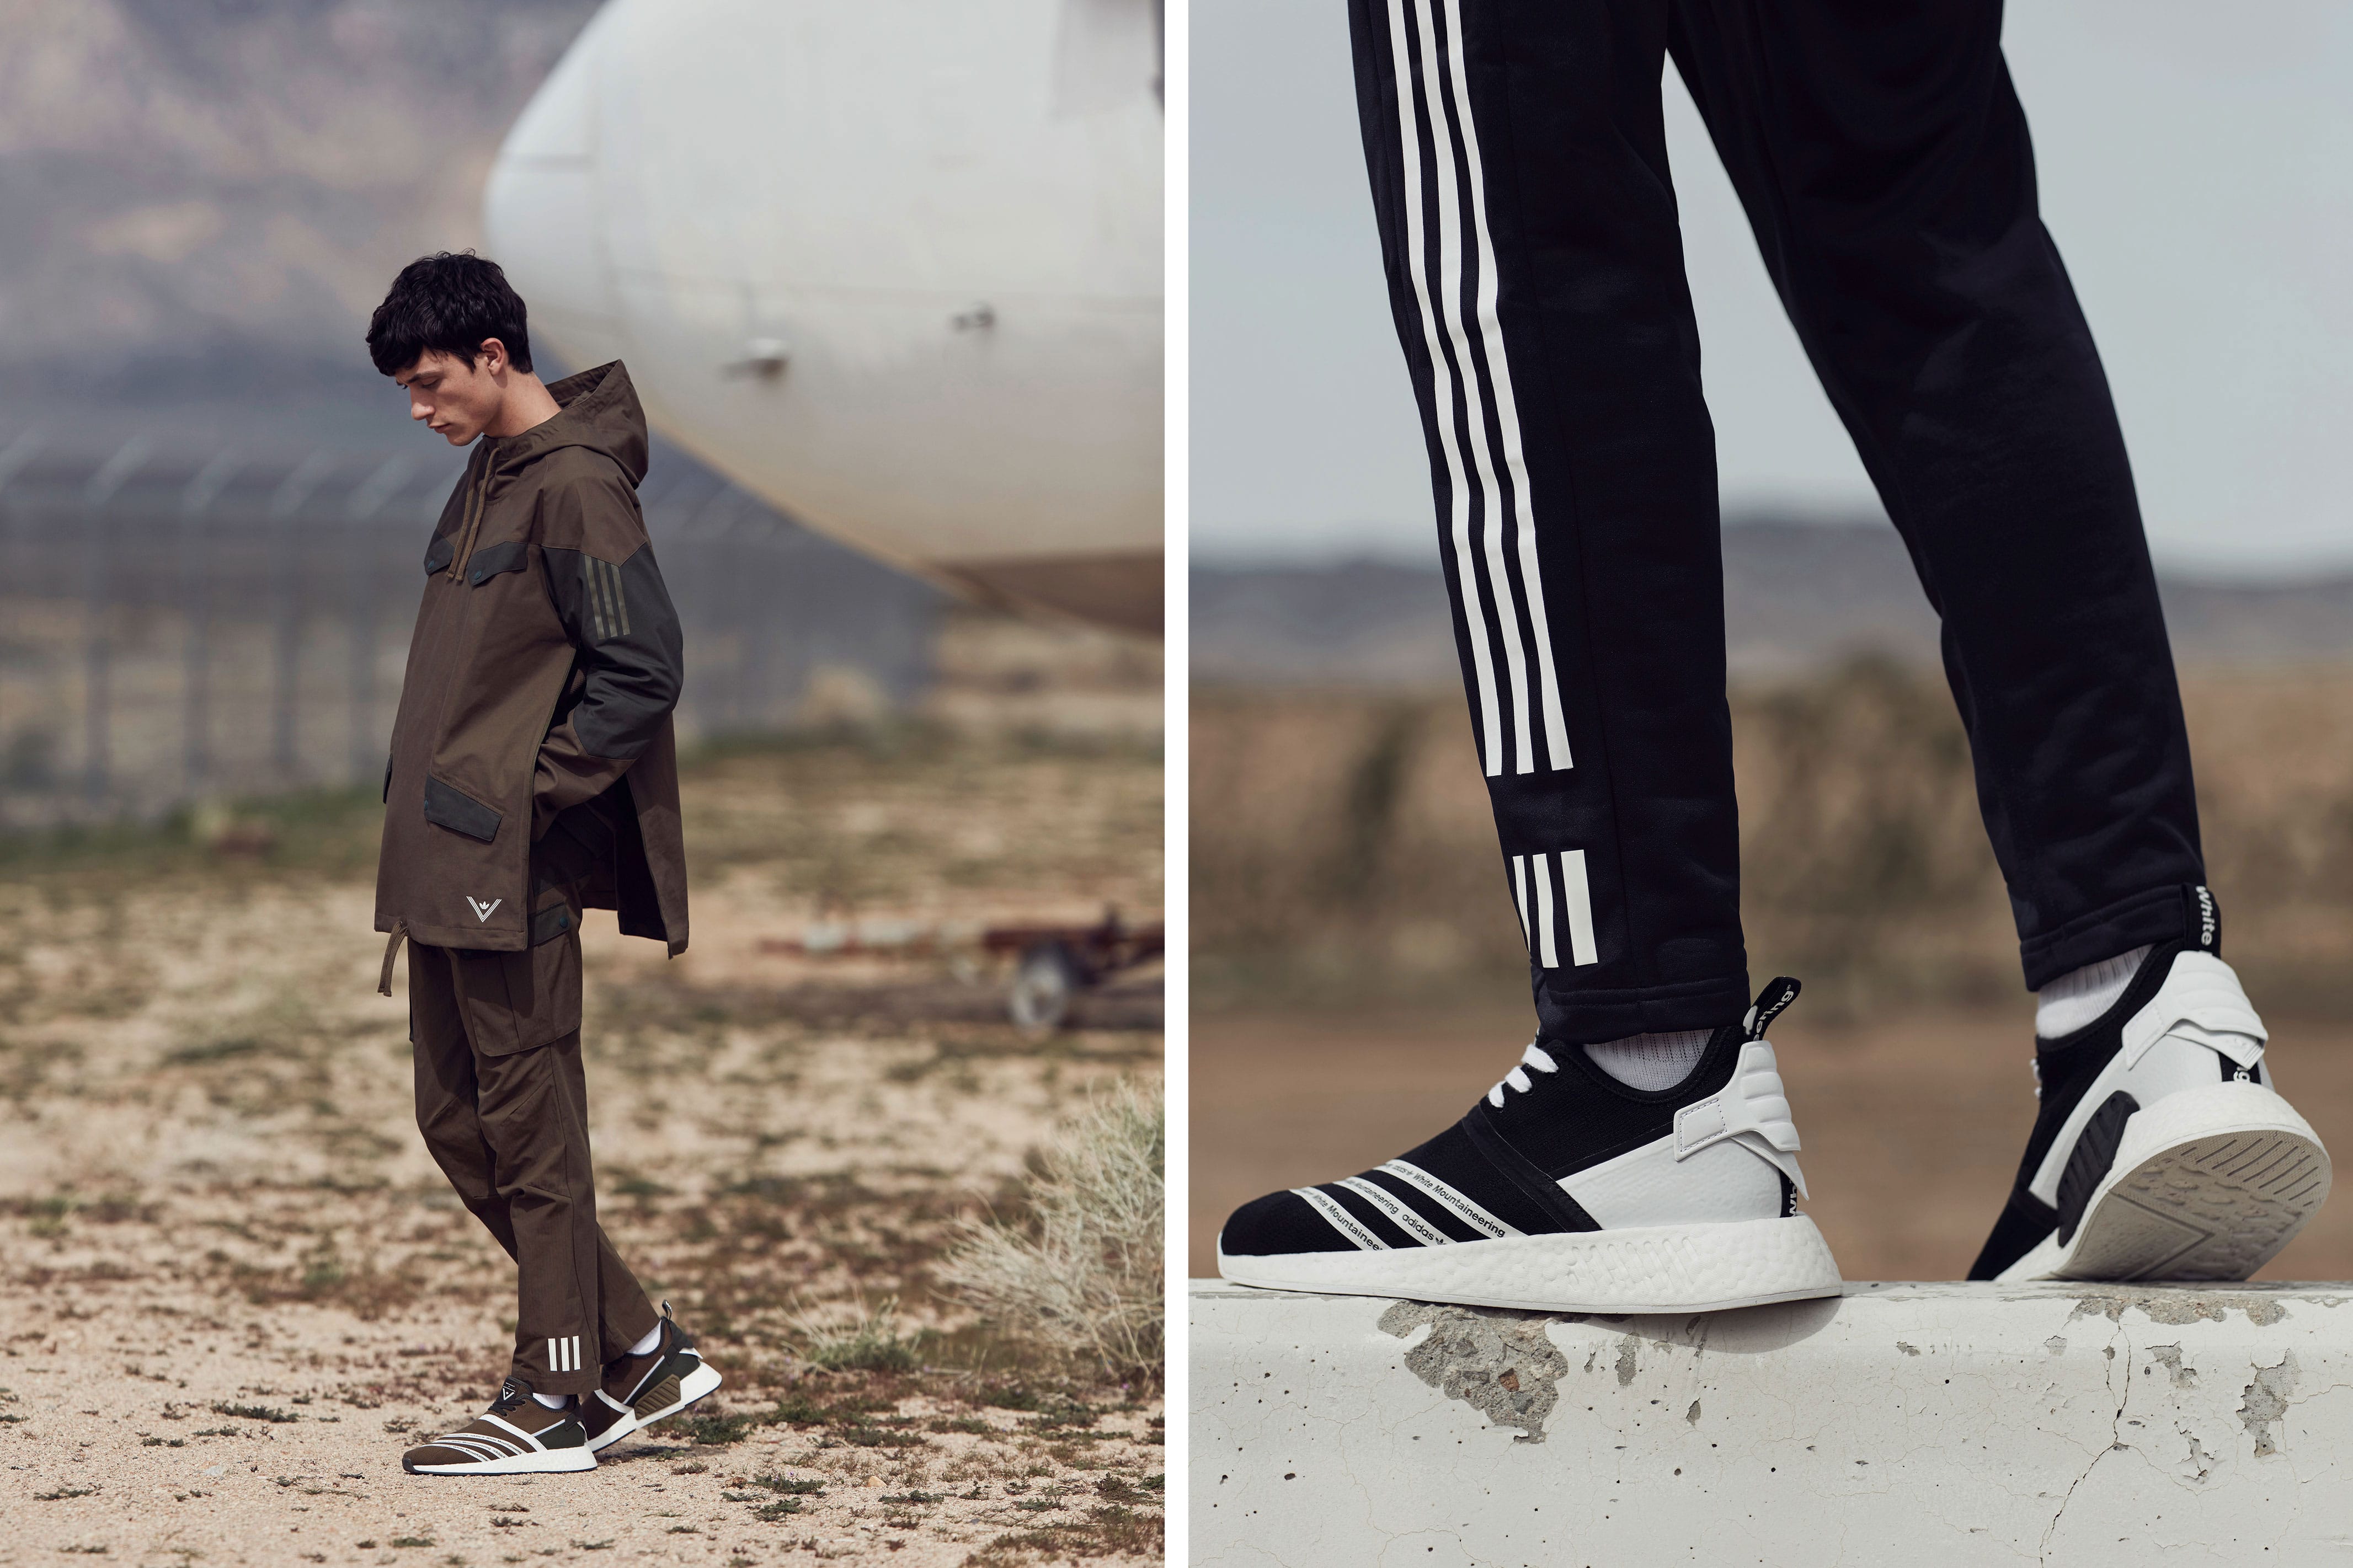 White Mountaineering x adidas Originals 2017 Fall/Winter Collection |  HYPEBEAST